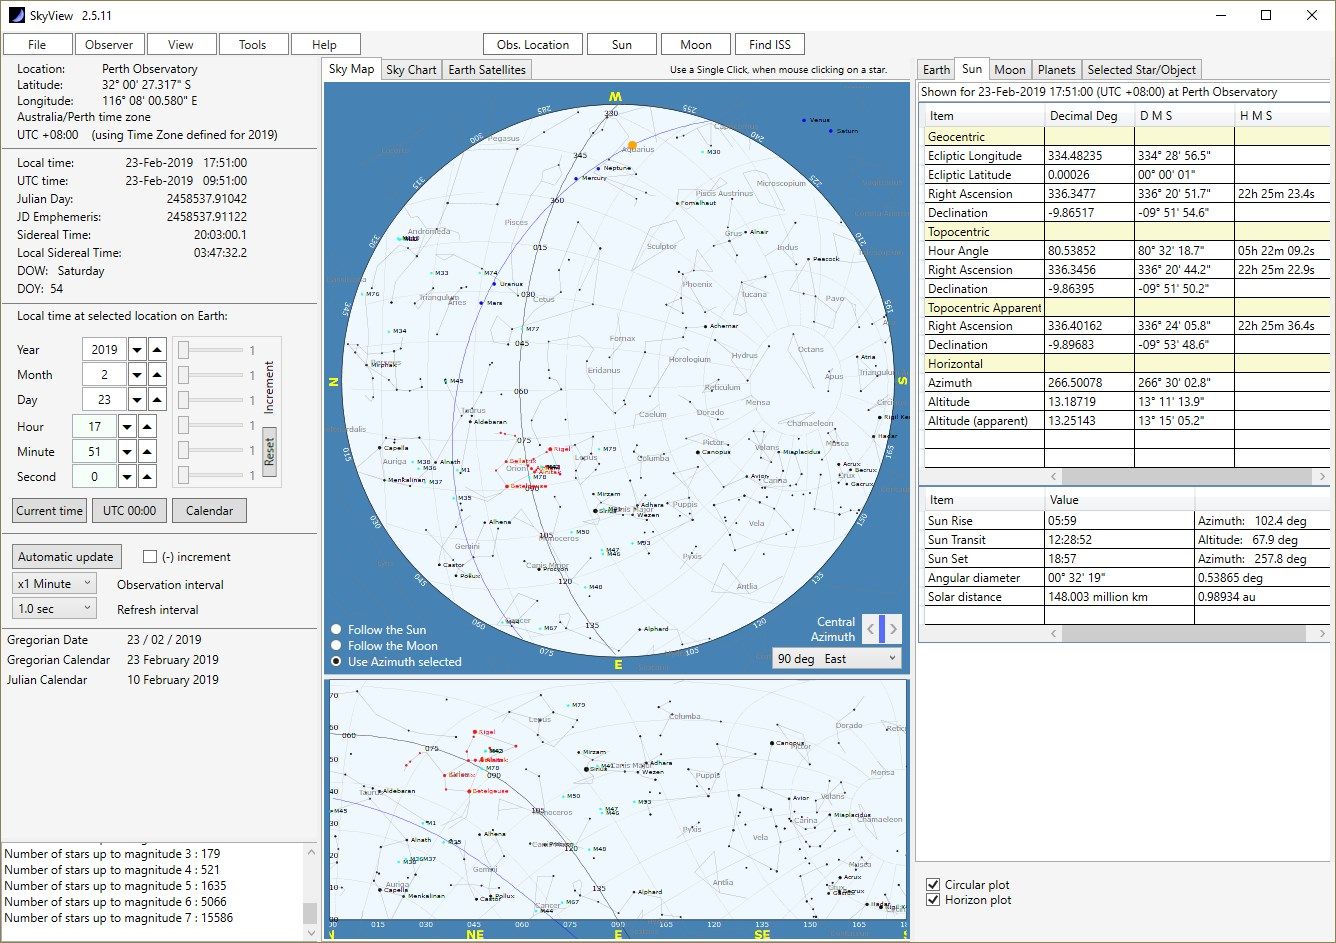 Main screen upon startup, showing the StarMap plot